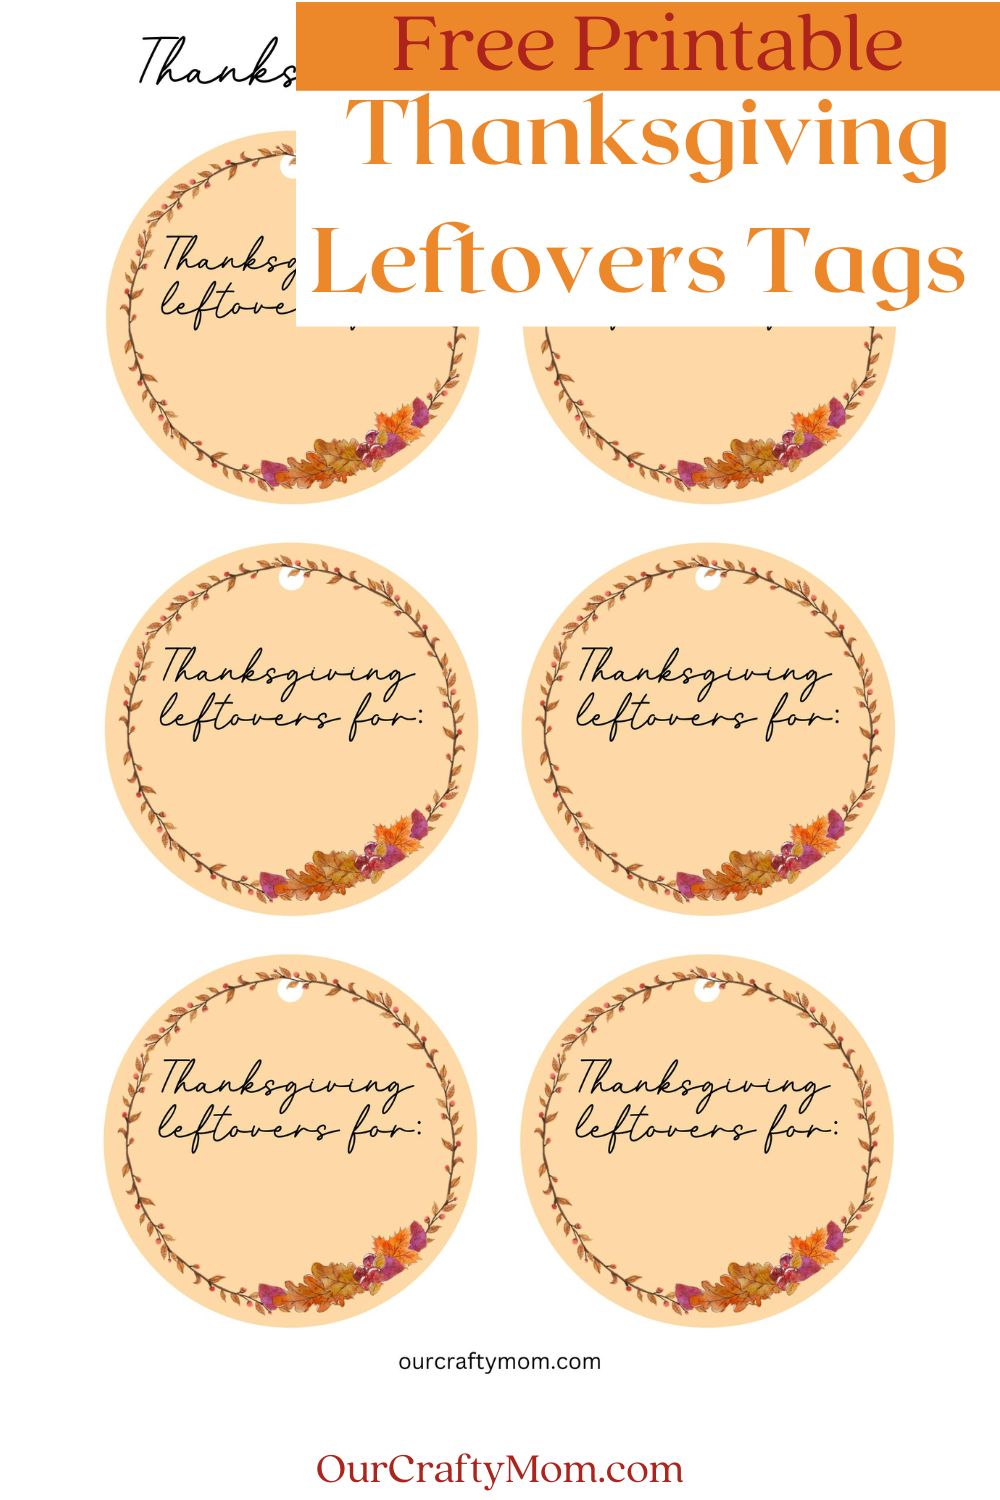 free leftovers tags